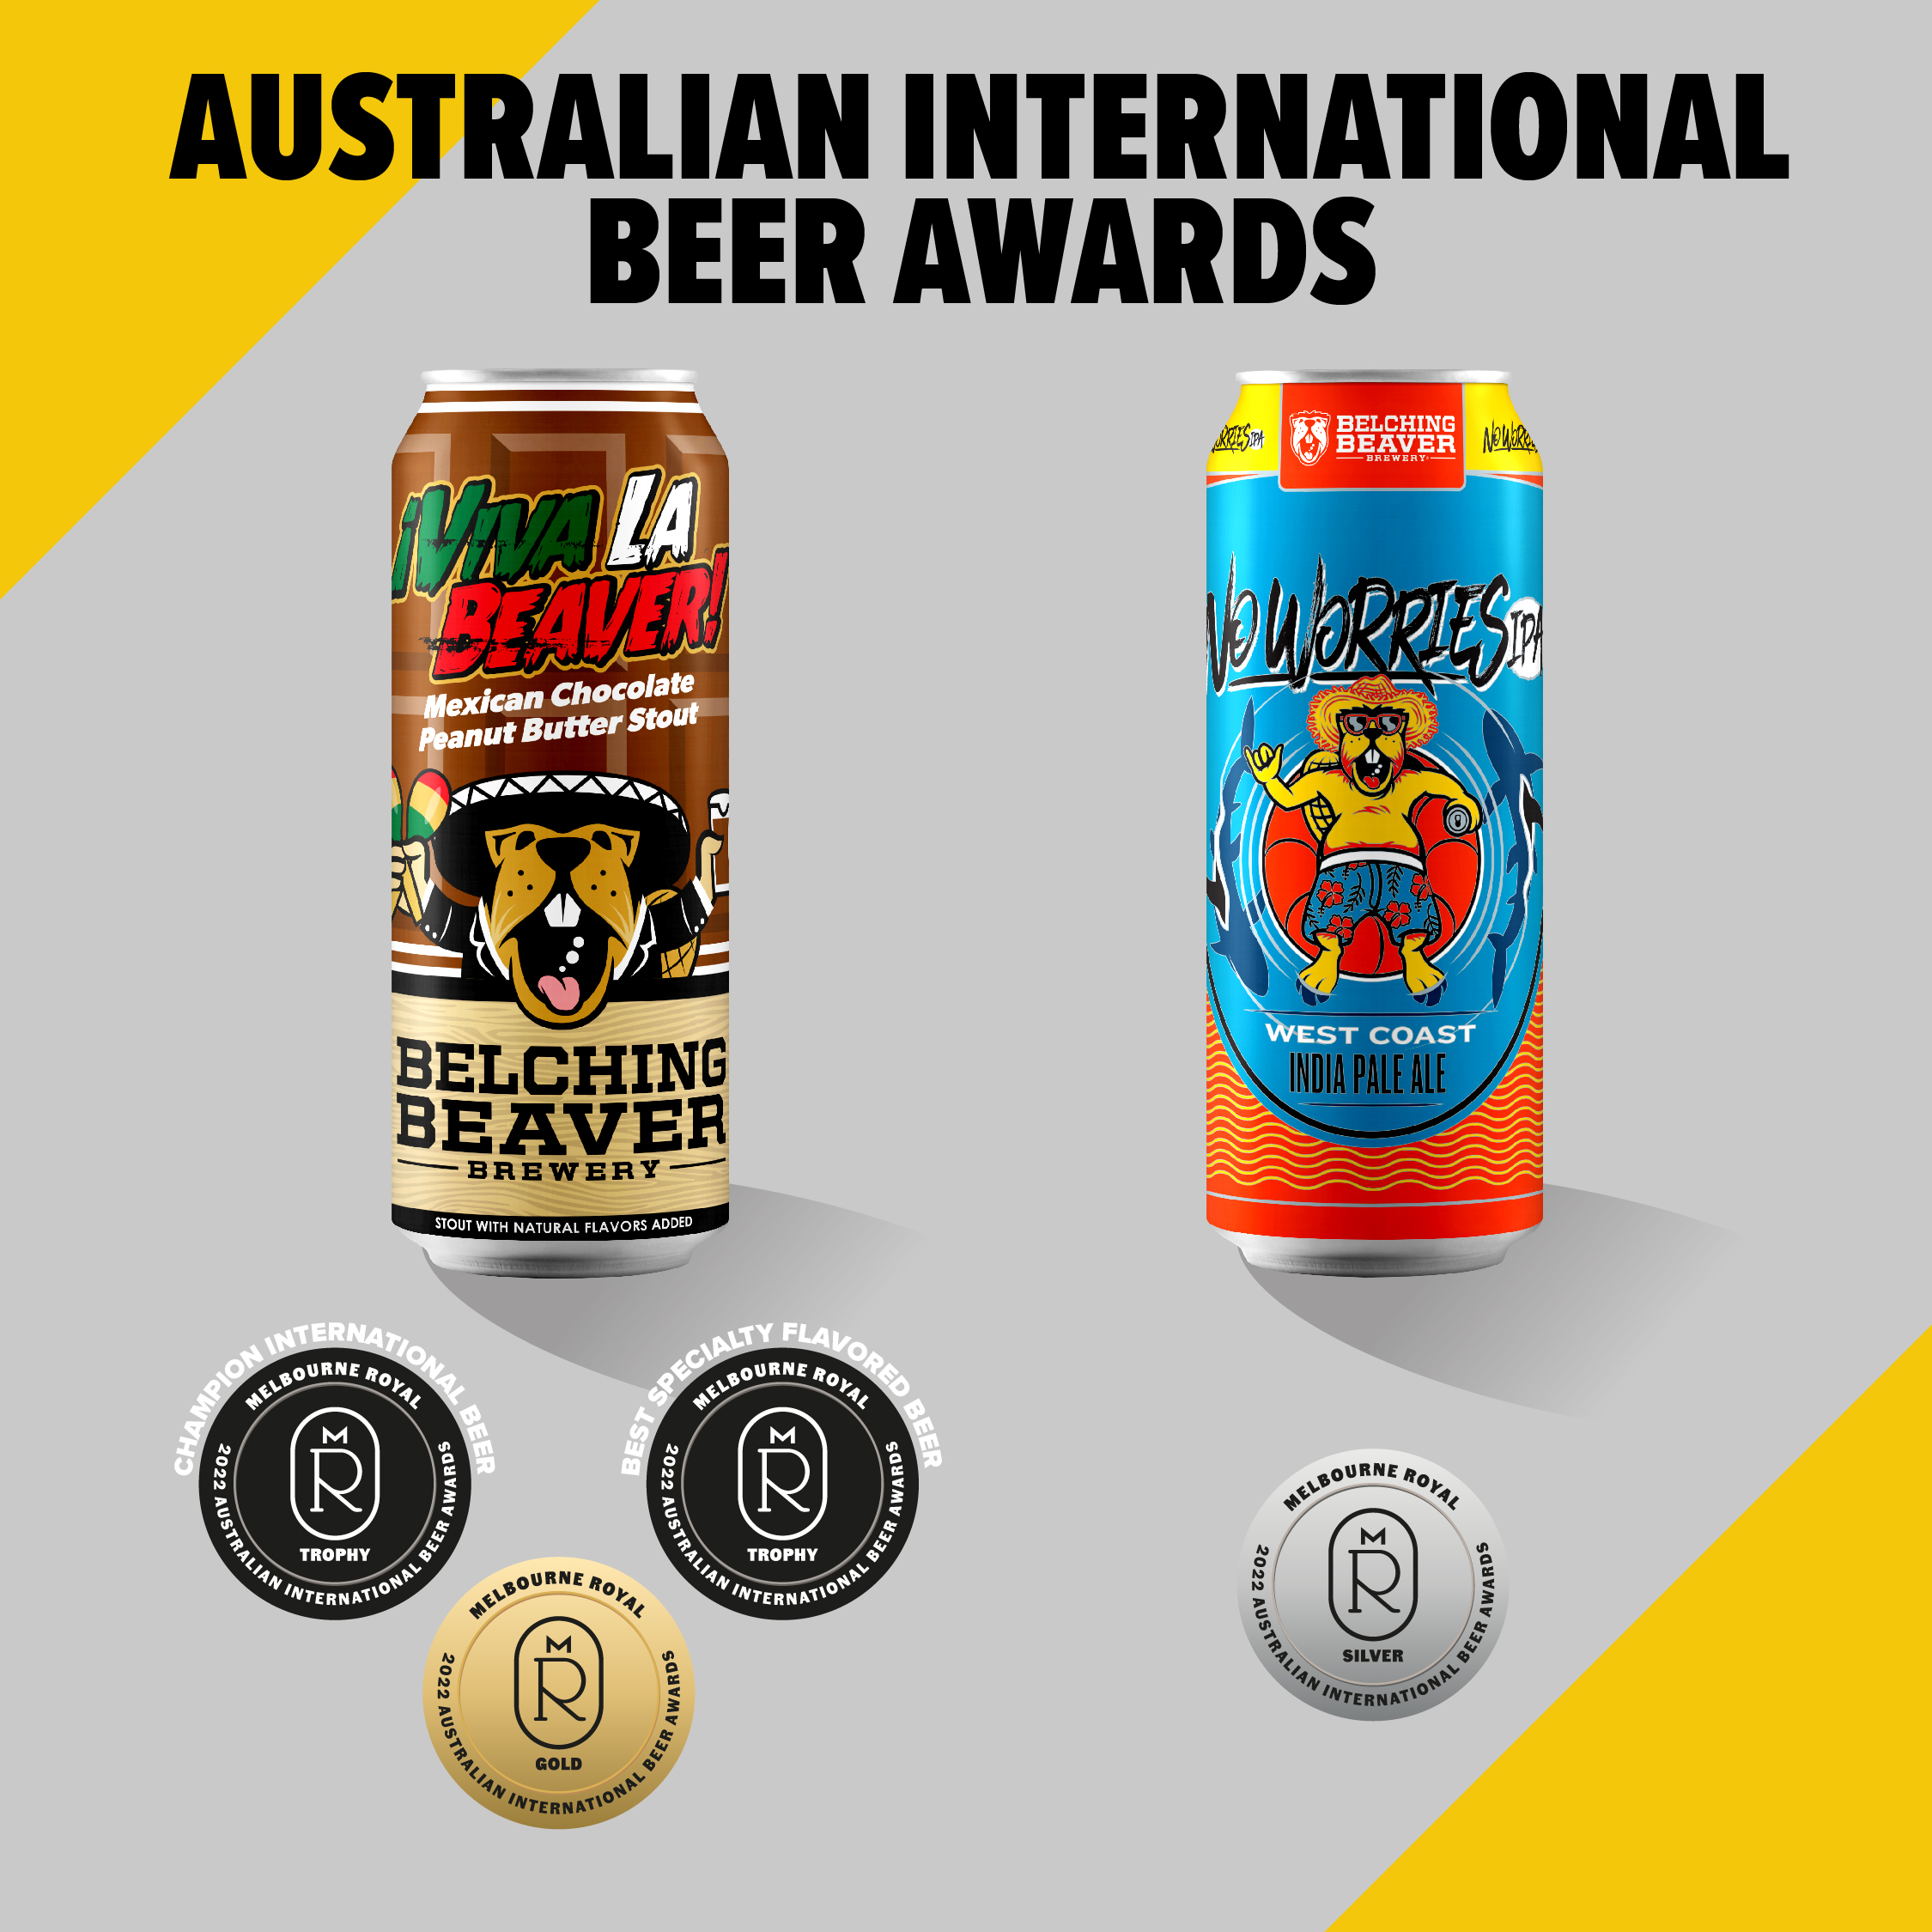 This is an image of Viva La Beaver and No Worries with images of each award the beers won.